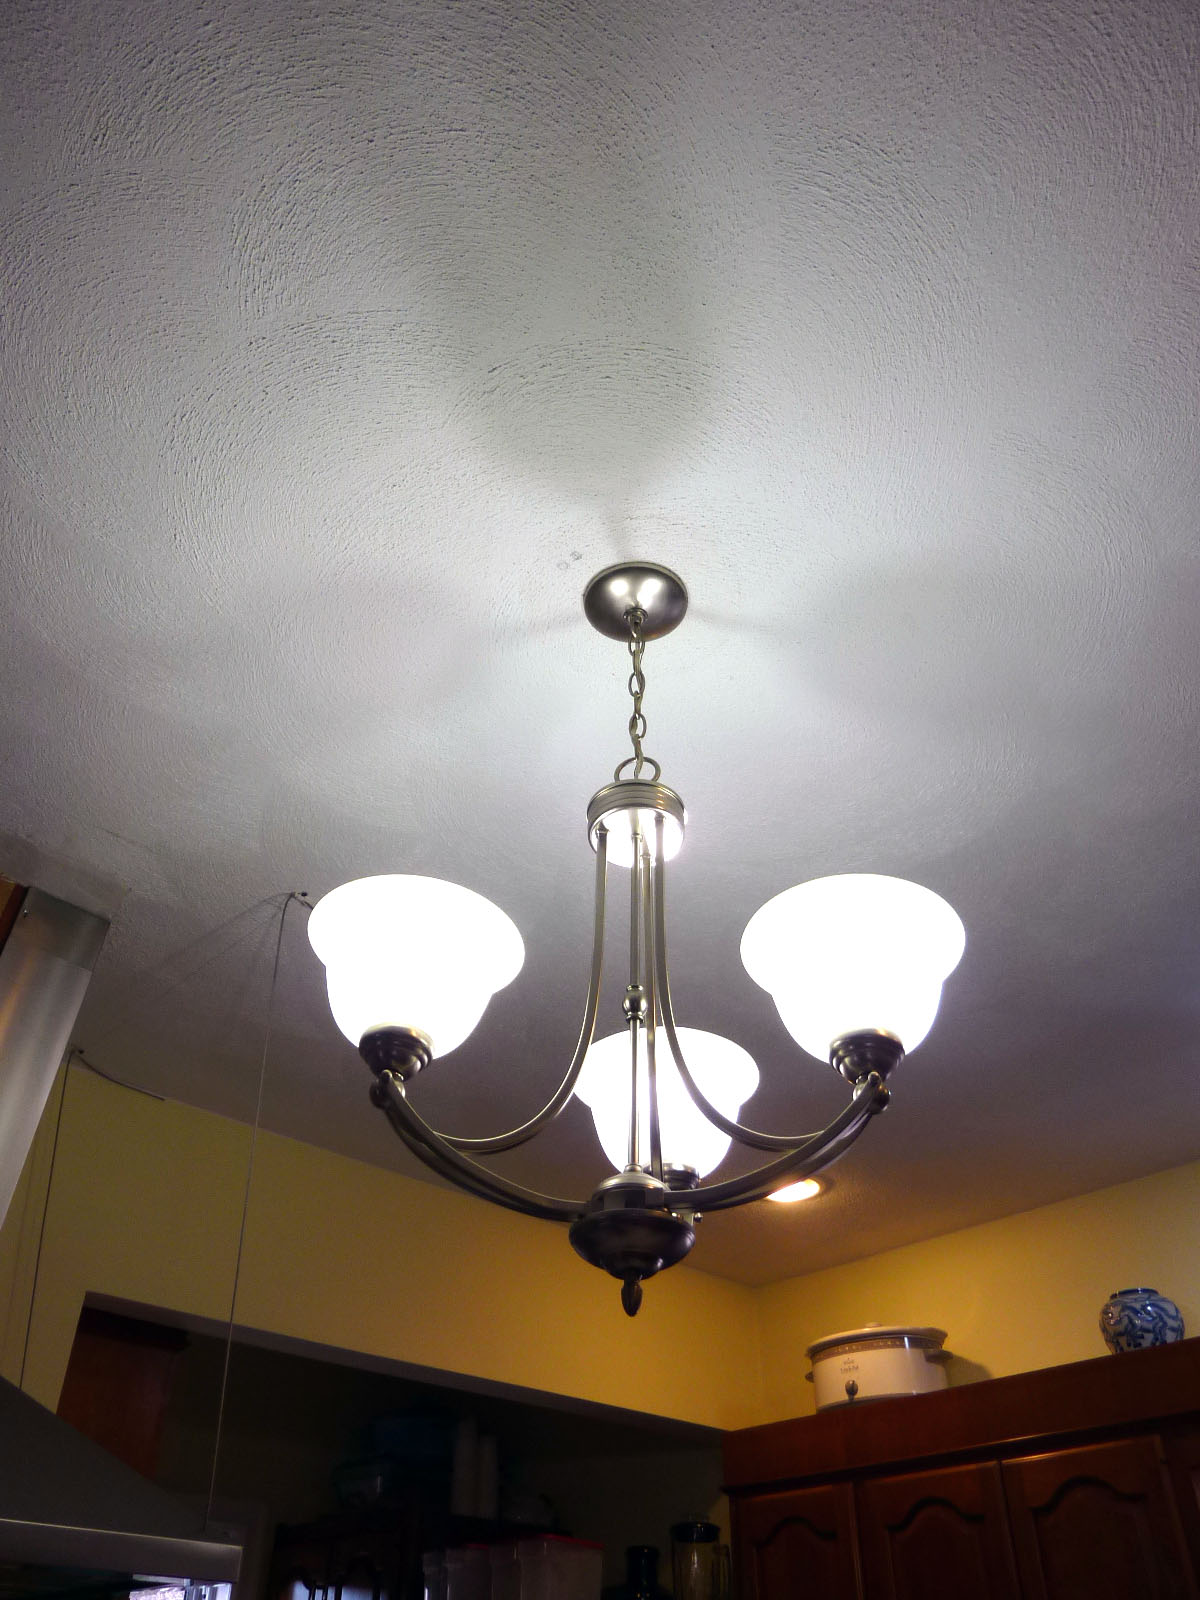 This light fixture also came from the Reuse Center.